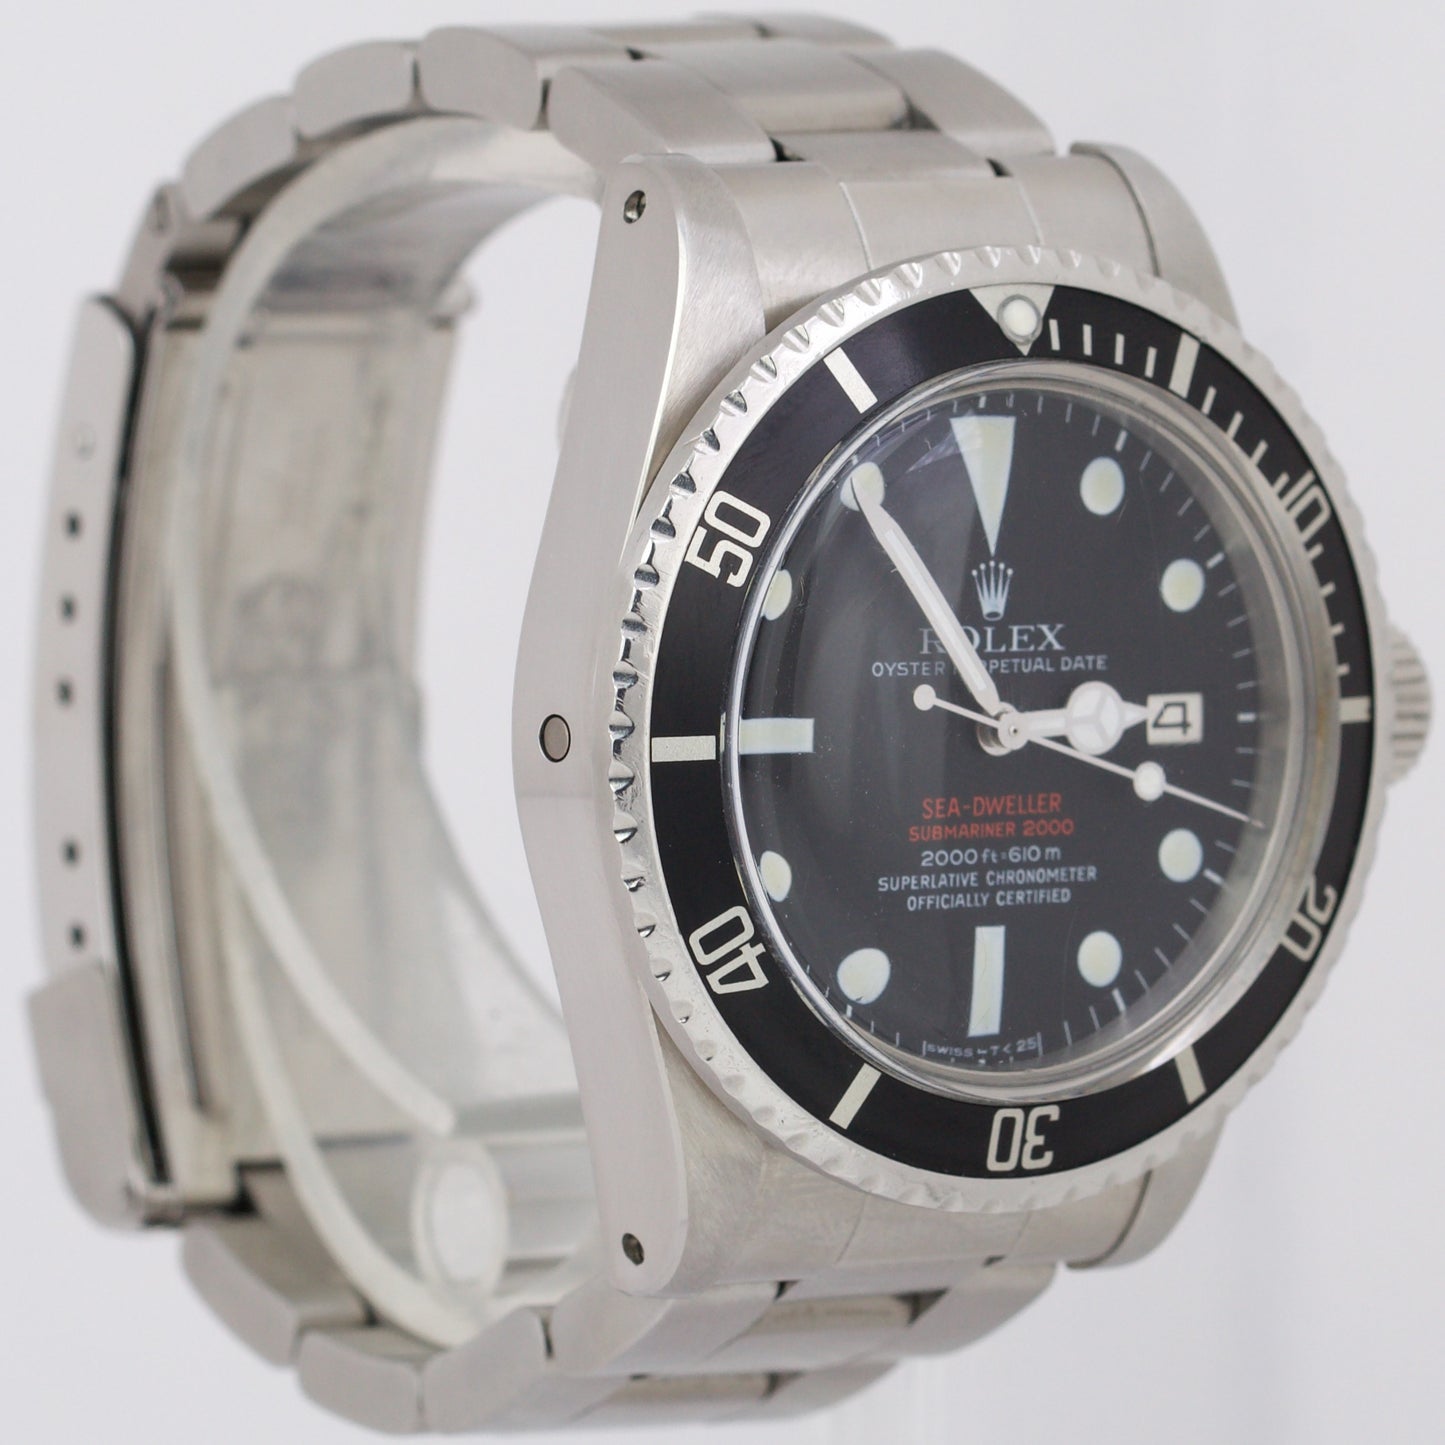 1976 Rolex Sea-Dweller DOUBLE RED MK3 40mm DRSD Stainless Steel Dive 1665 Watch